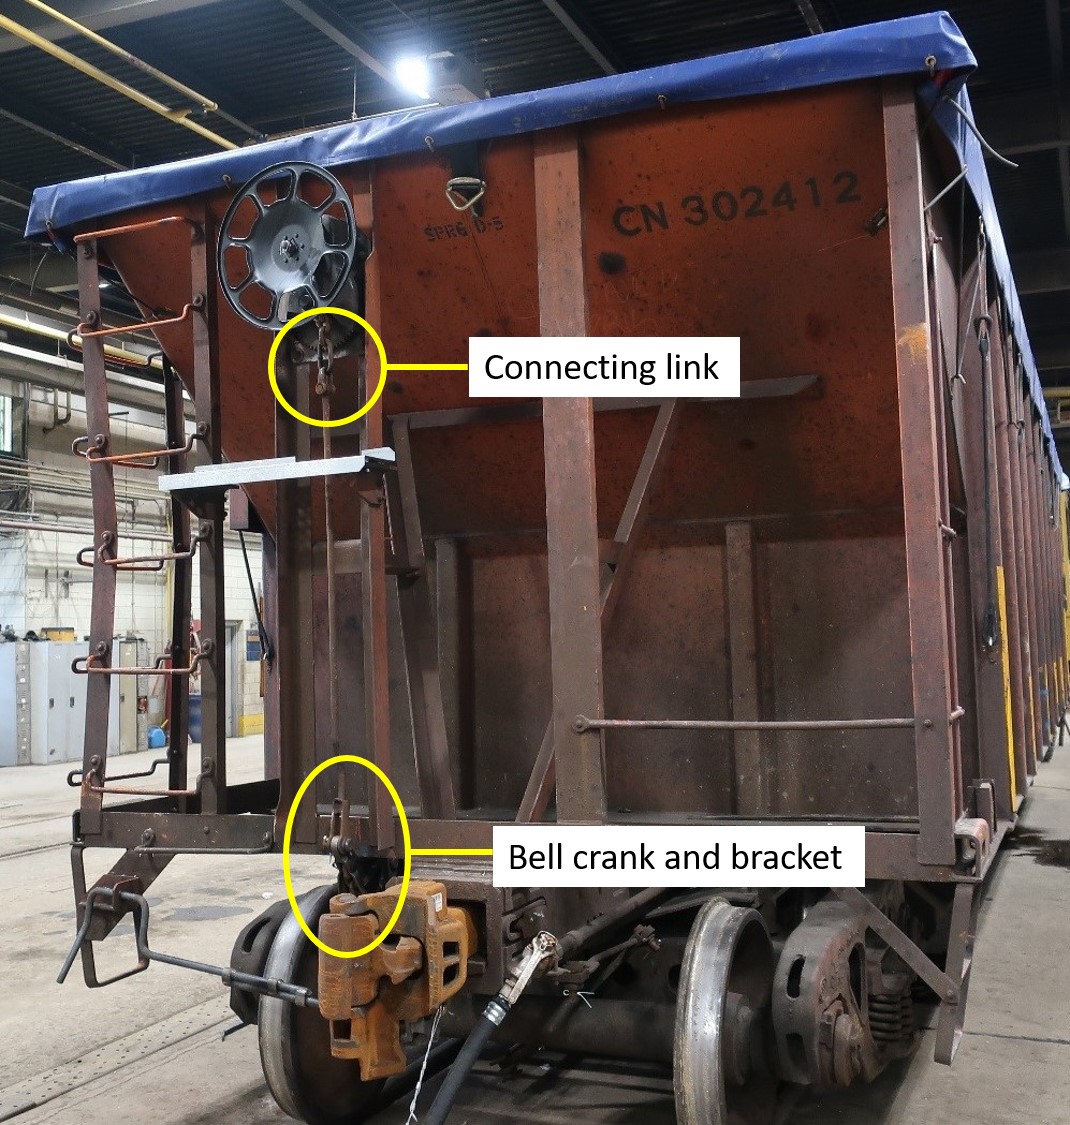 CN 302412 with hand brake applied and bell-crank bracket cut to simulate a broken condition (Source: TSB)